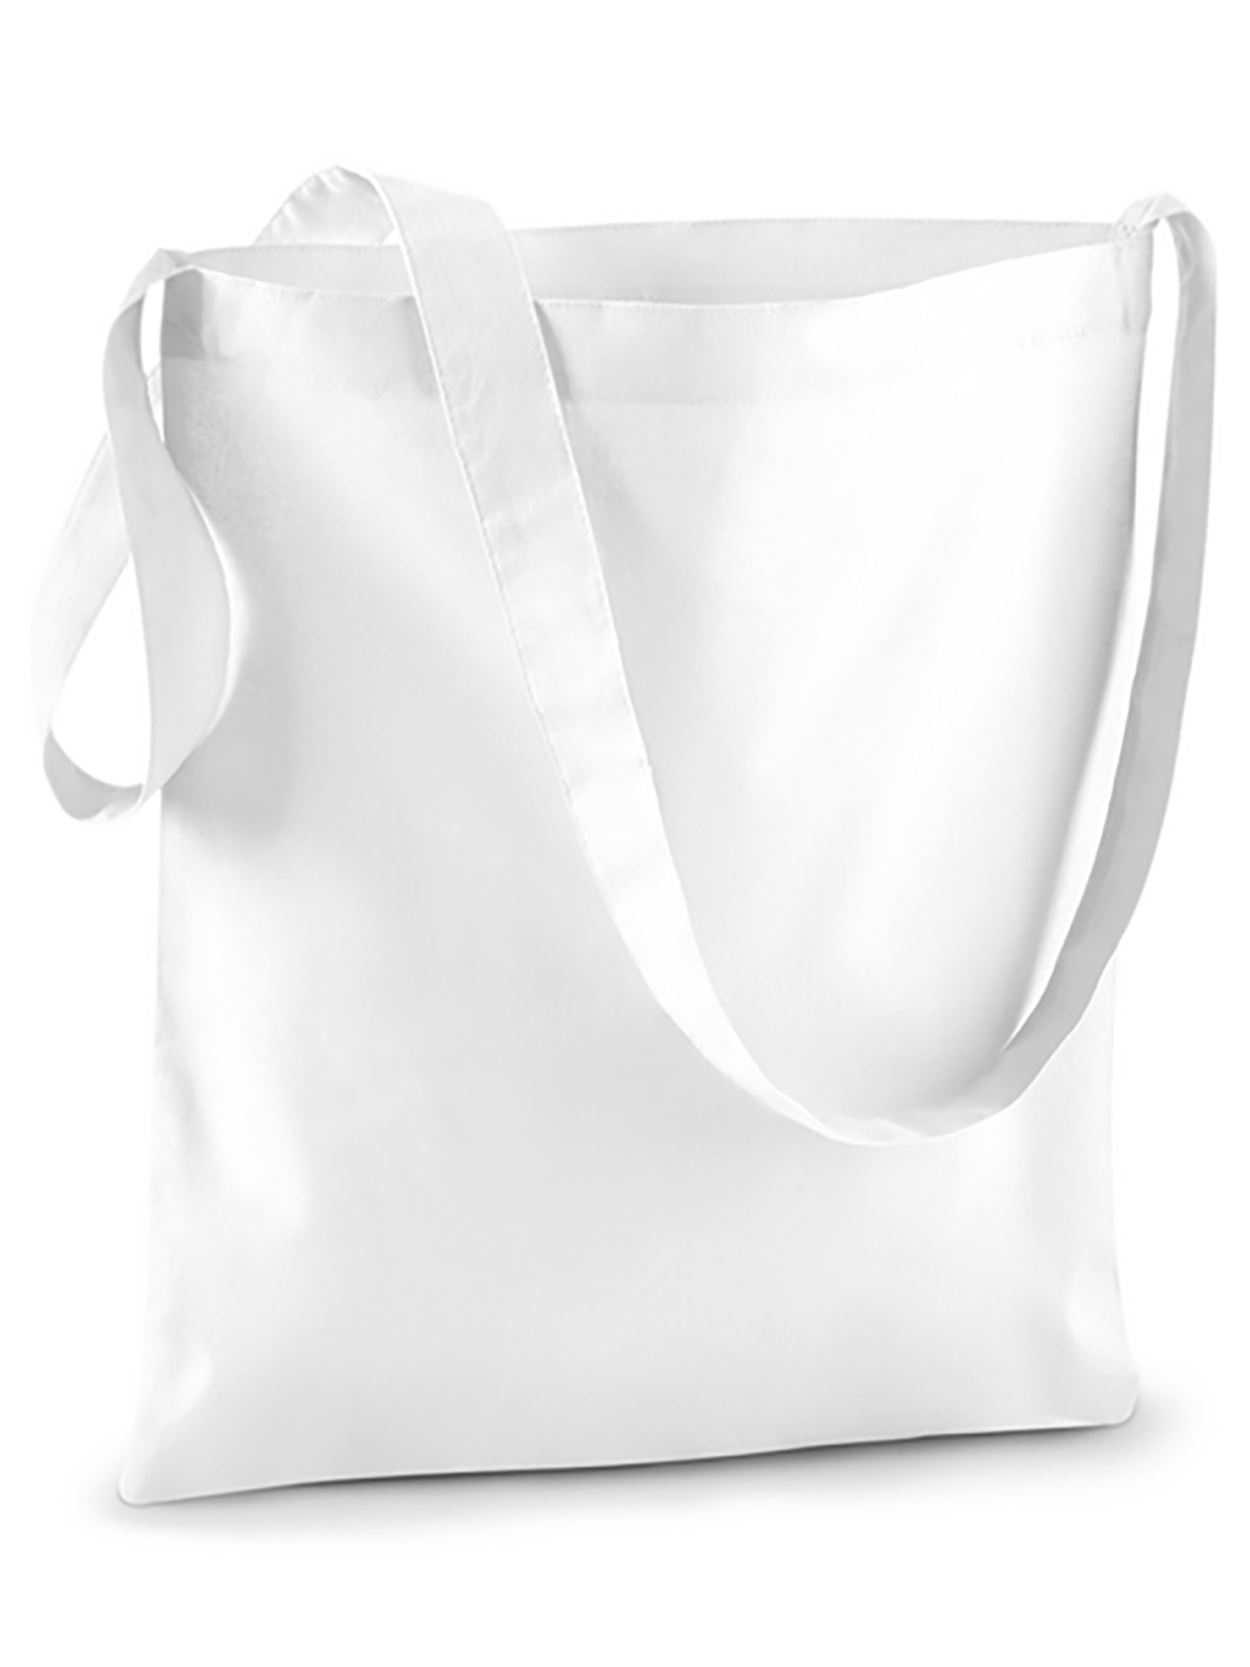 W107 Sling Tote Image 4